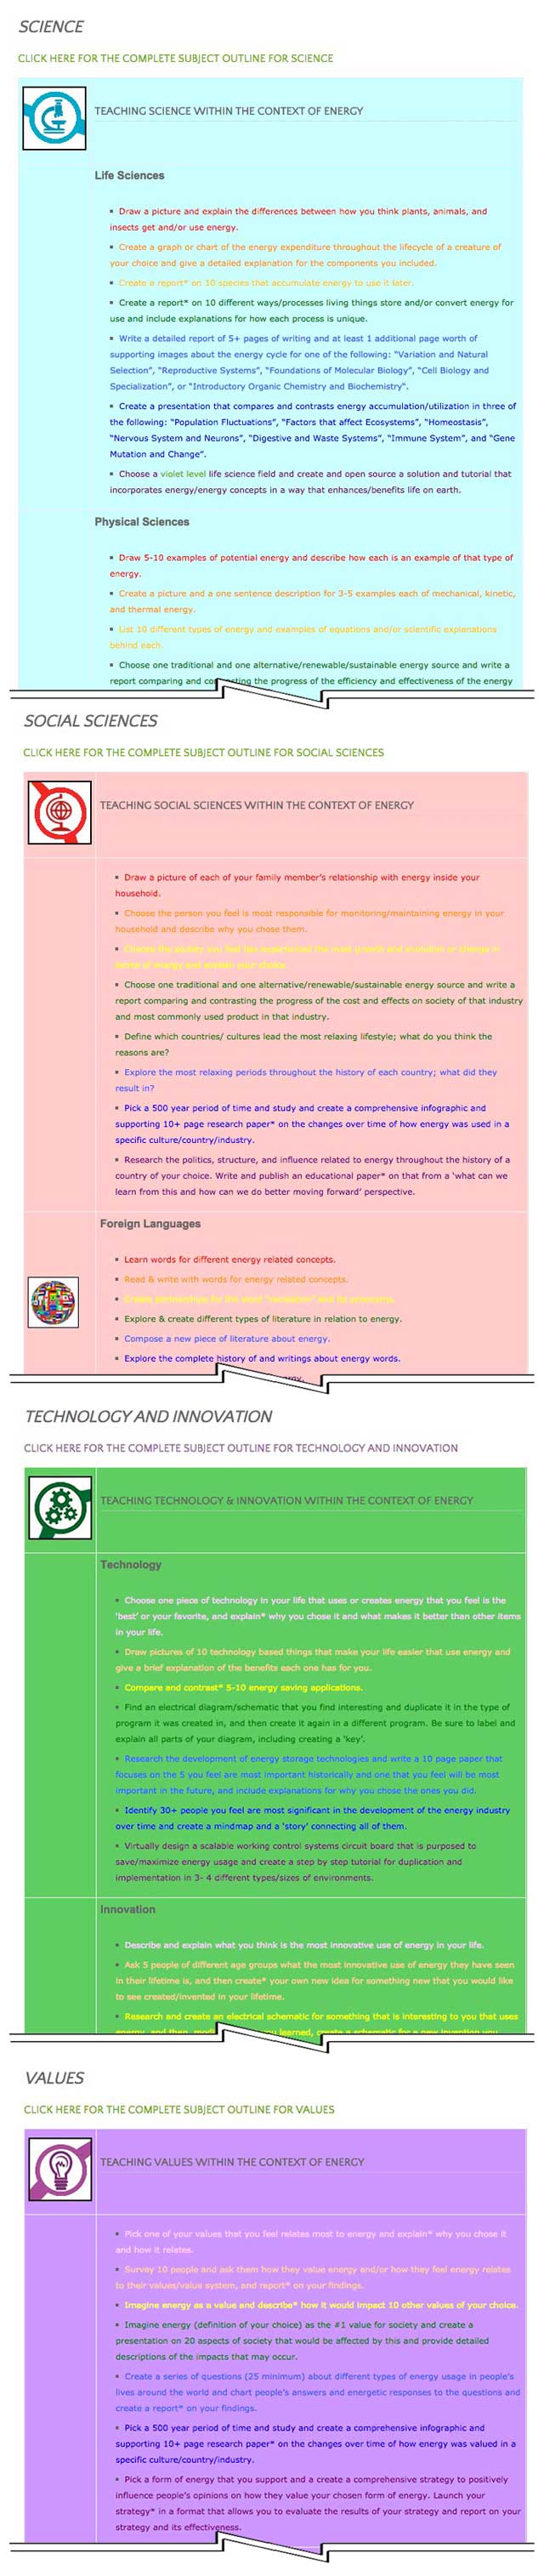 This last week the core team ransferred the final 50% of the written content for the Energy Lesson Plan to the website, as you see here. This lesson plan purposed to teach all subjects, to all learning levels, in any learning environment, using the central theme of “Energy” is now 100% complete on our website.